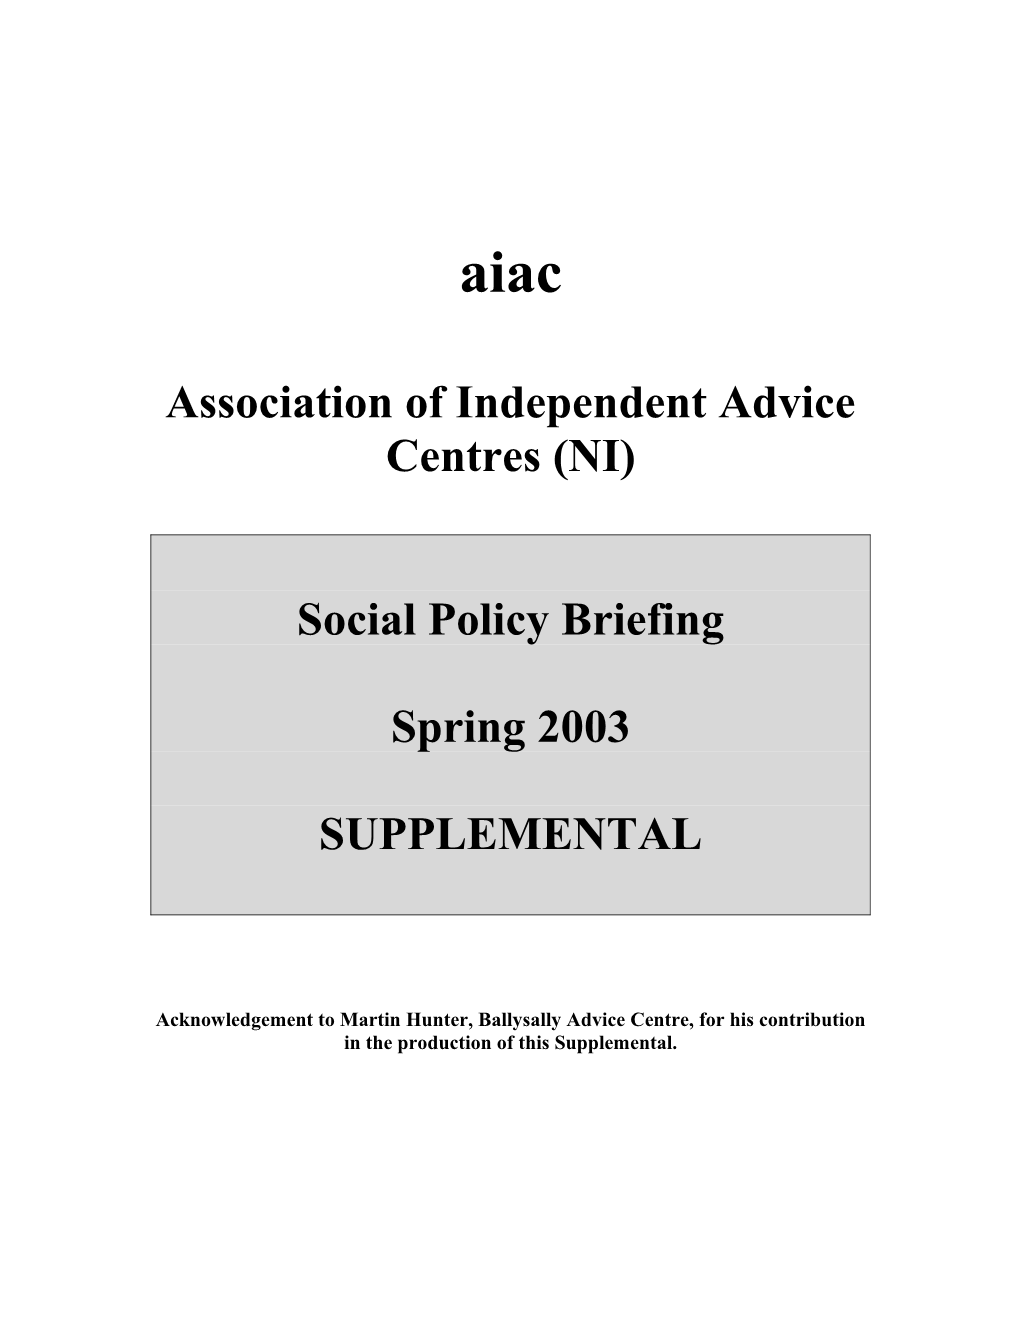 Association of Independent Advice Centres (NI)